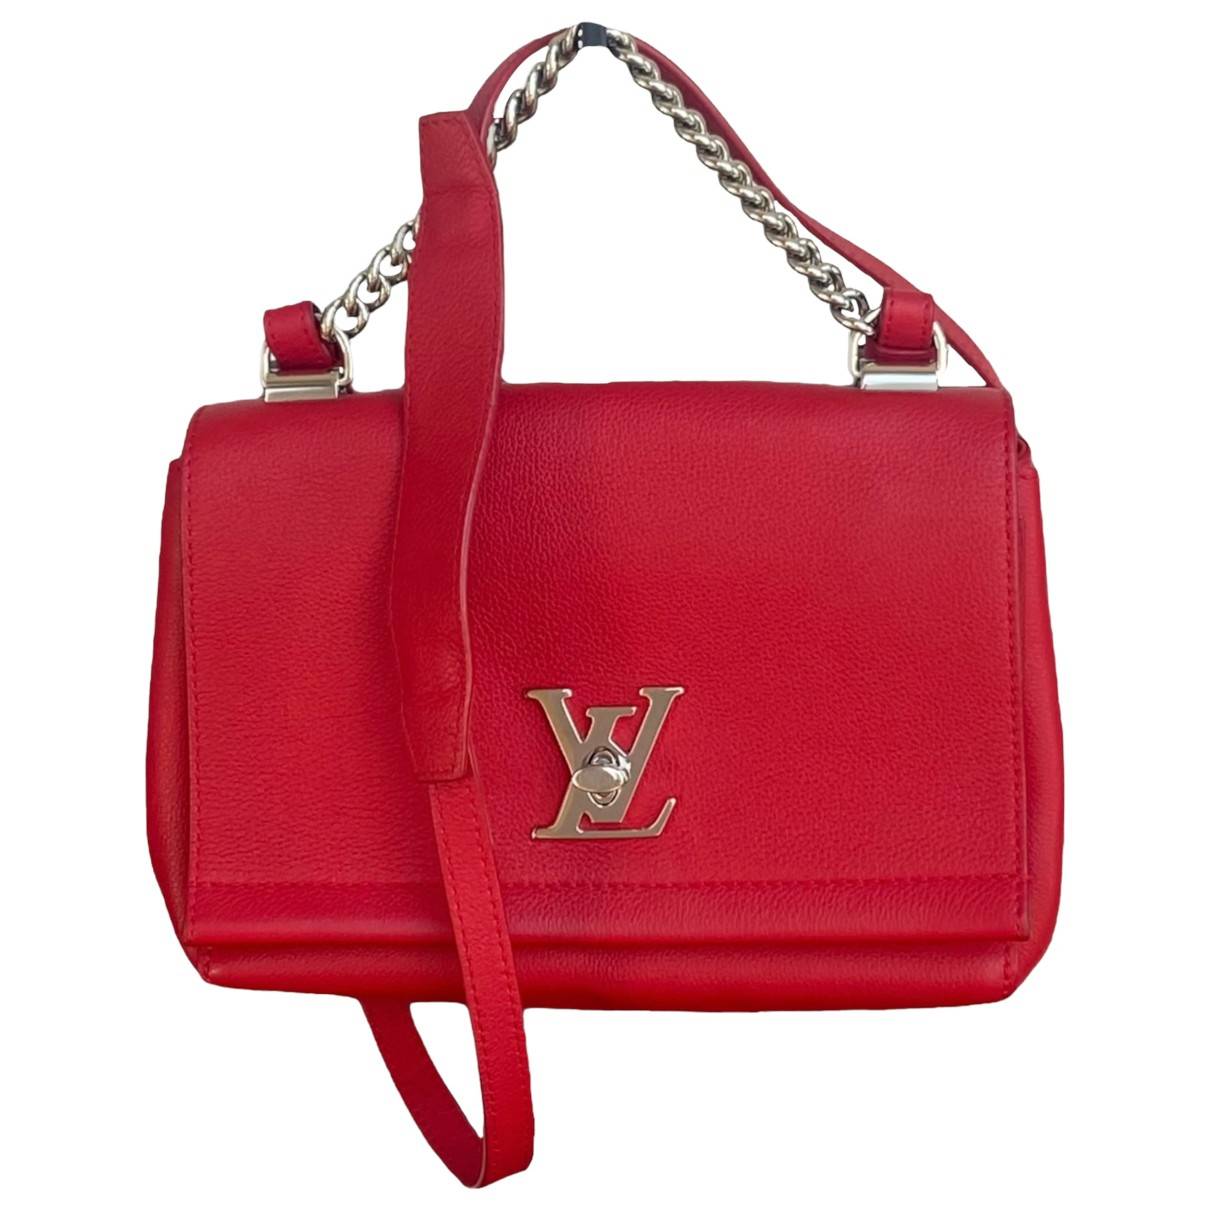 Louis Vuitton - Authenticated Lockme Handbag - Leather Red Plain for Women, Very Good Condition